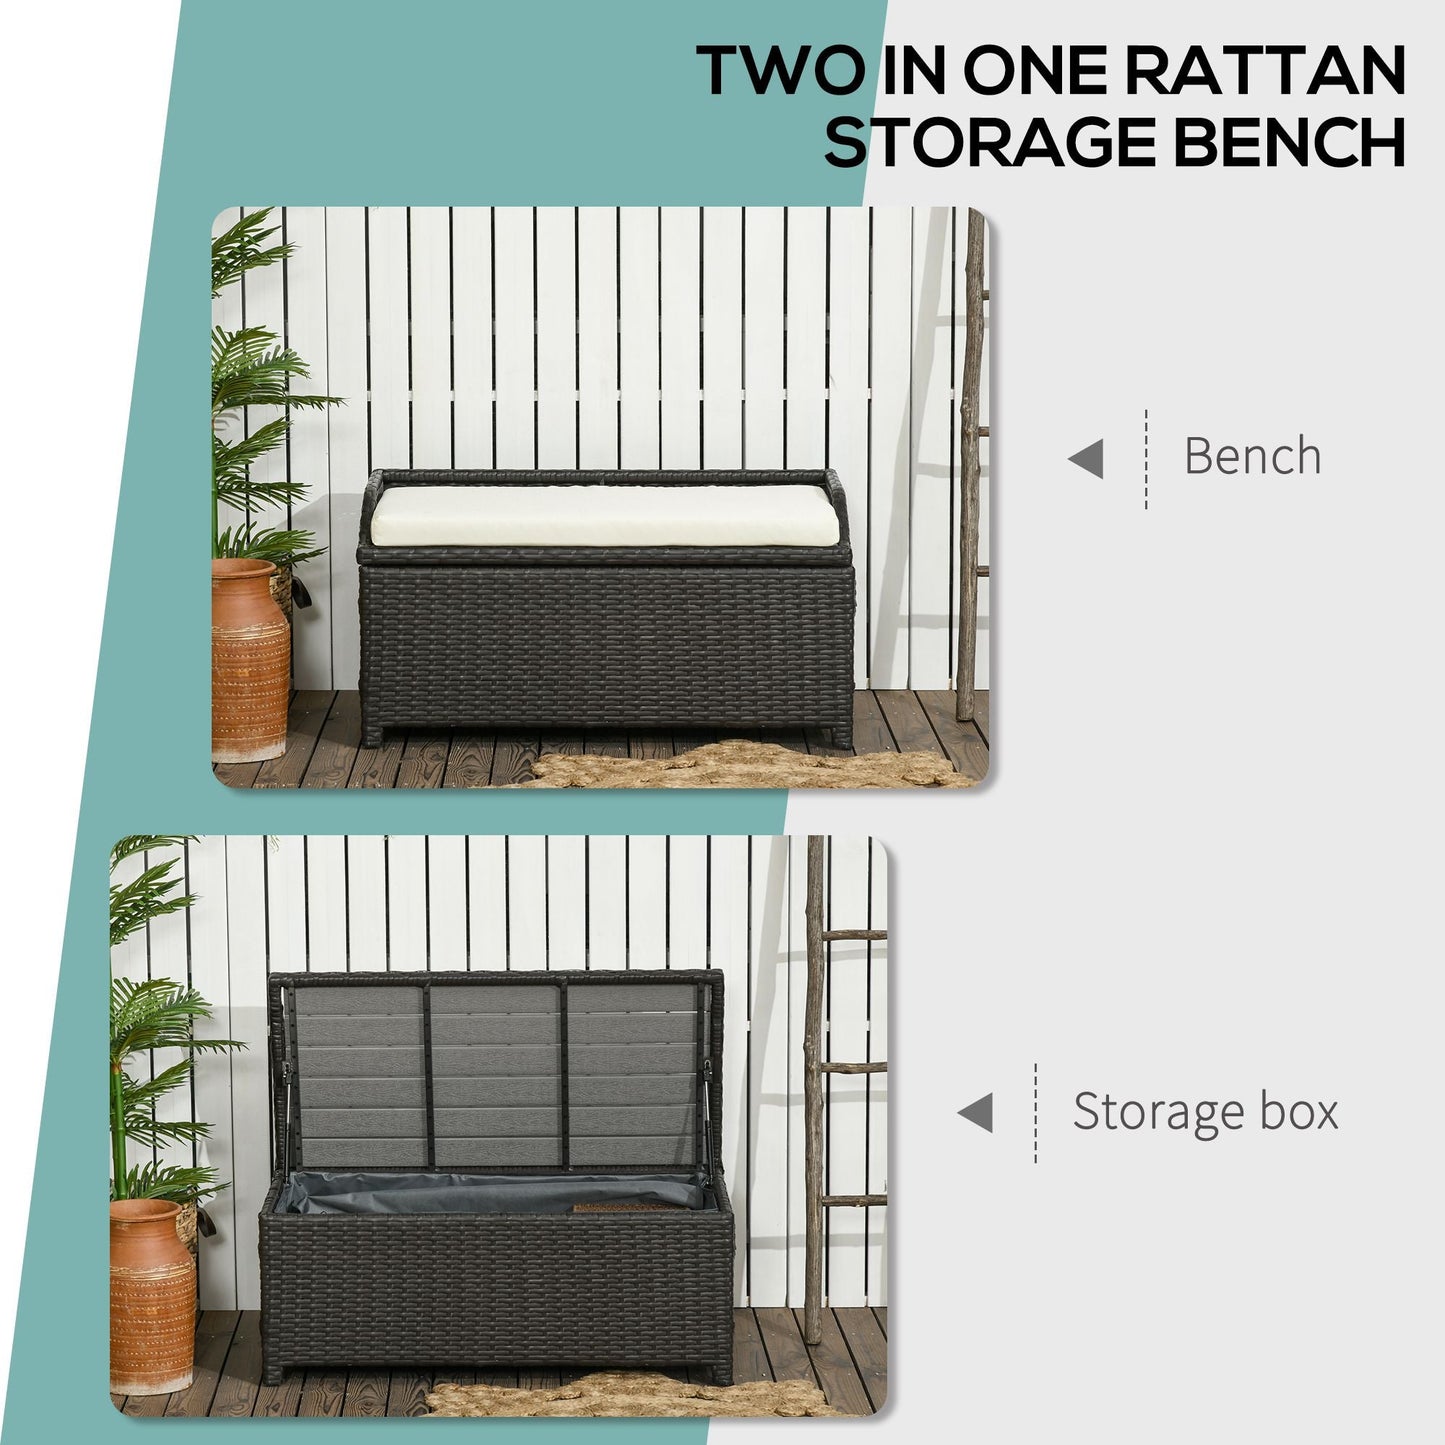 Outdoor and Garden-Patio Wicker Storage Bench, Cushioned Outdoor PE Rattan Patio Furniture, Air Strut Assisted Easy Open, 2-In-1 Seat Box with Handles Seat - Outdoor Style Company